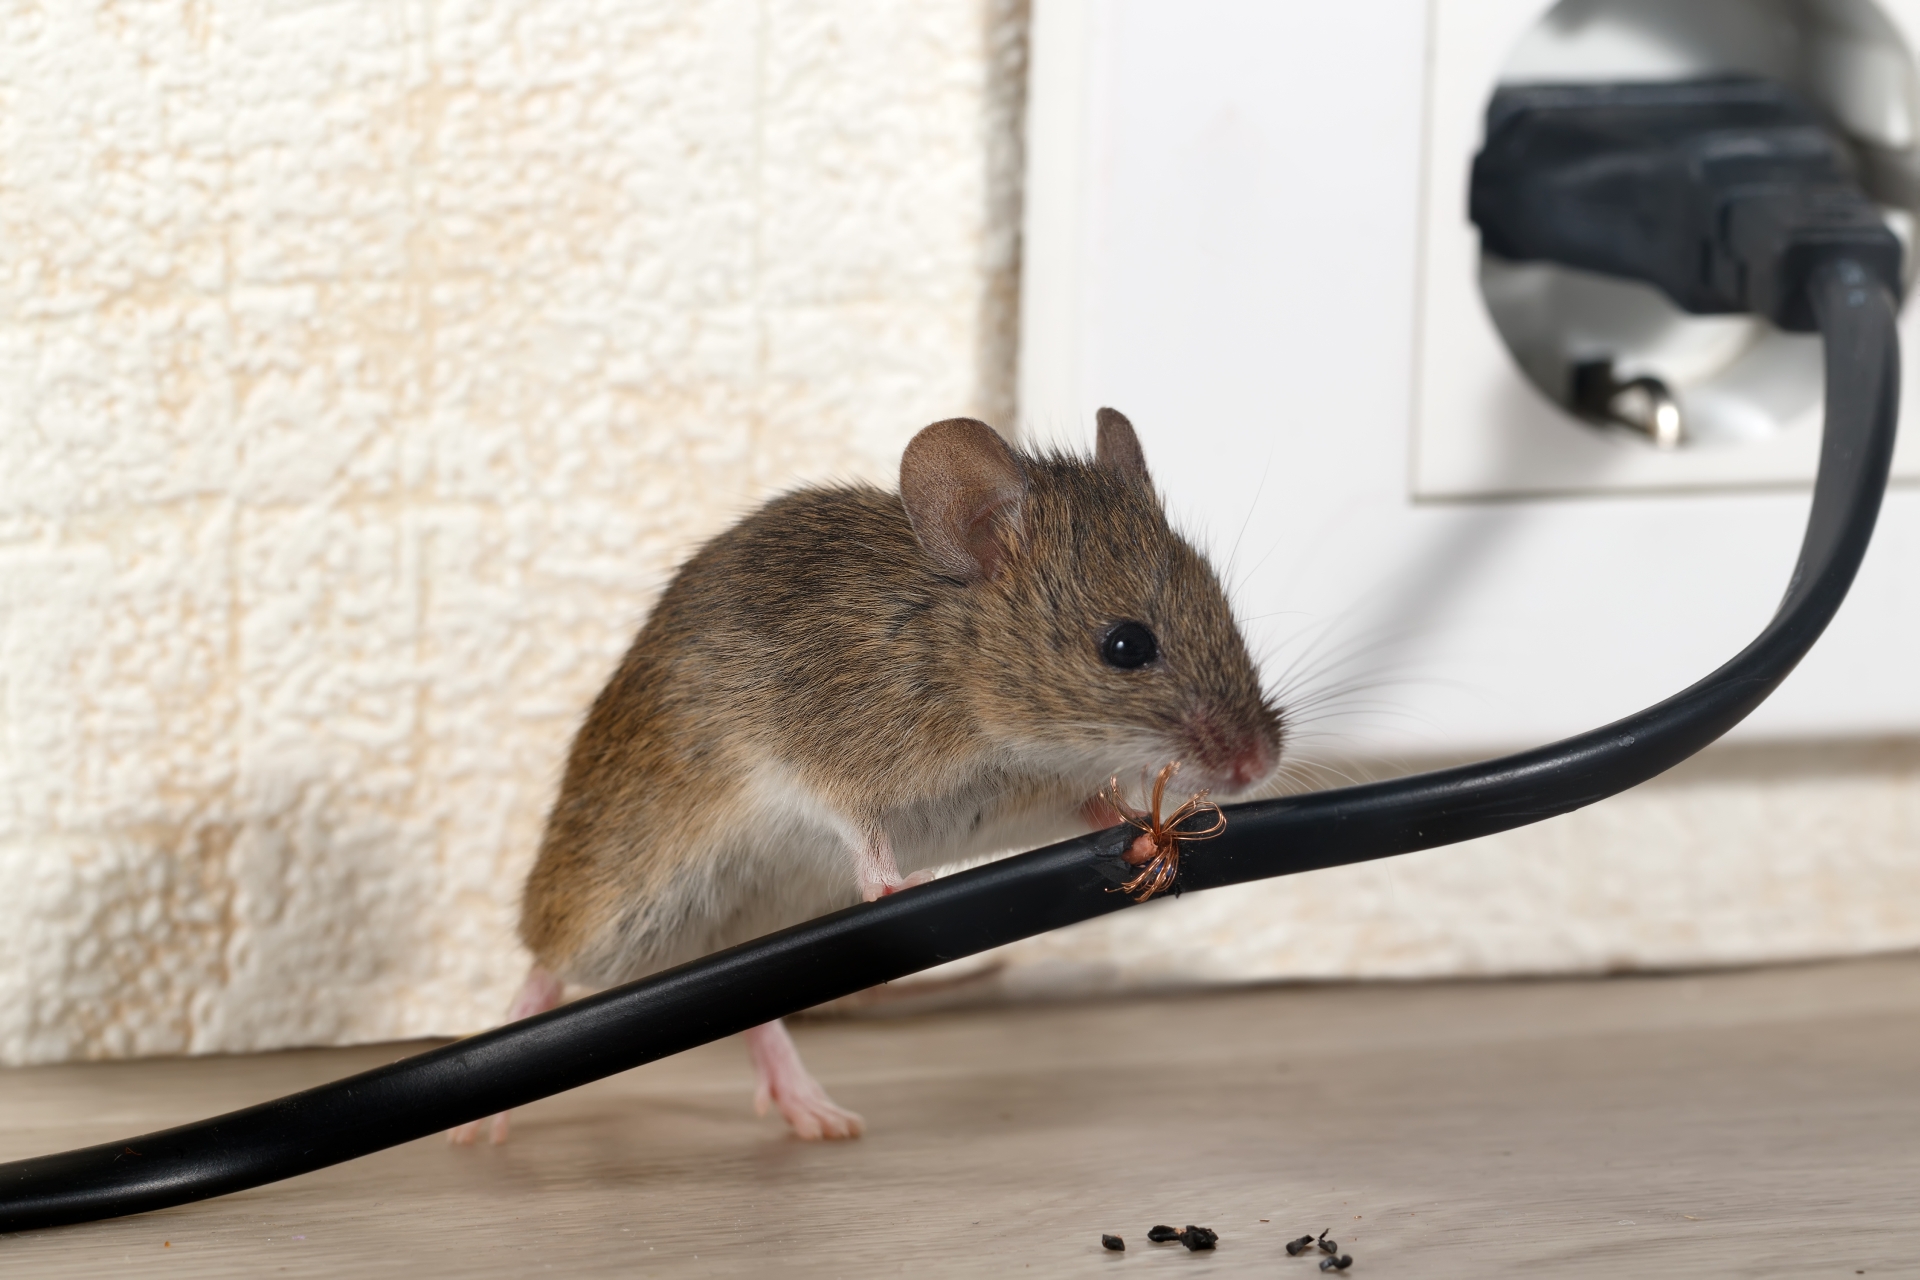 Mice Infestation, Pest Control in Brixton, SW2. Call Now 020 8166 9746